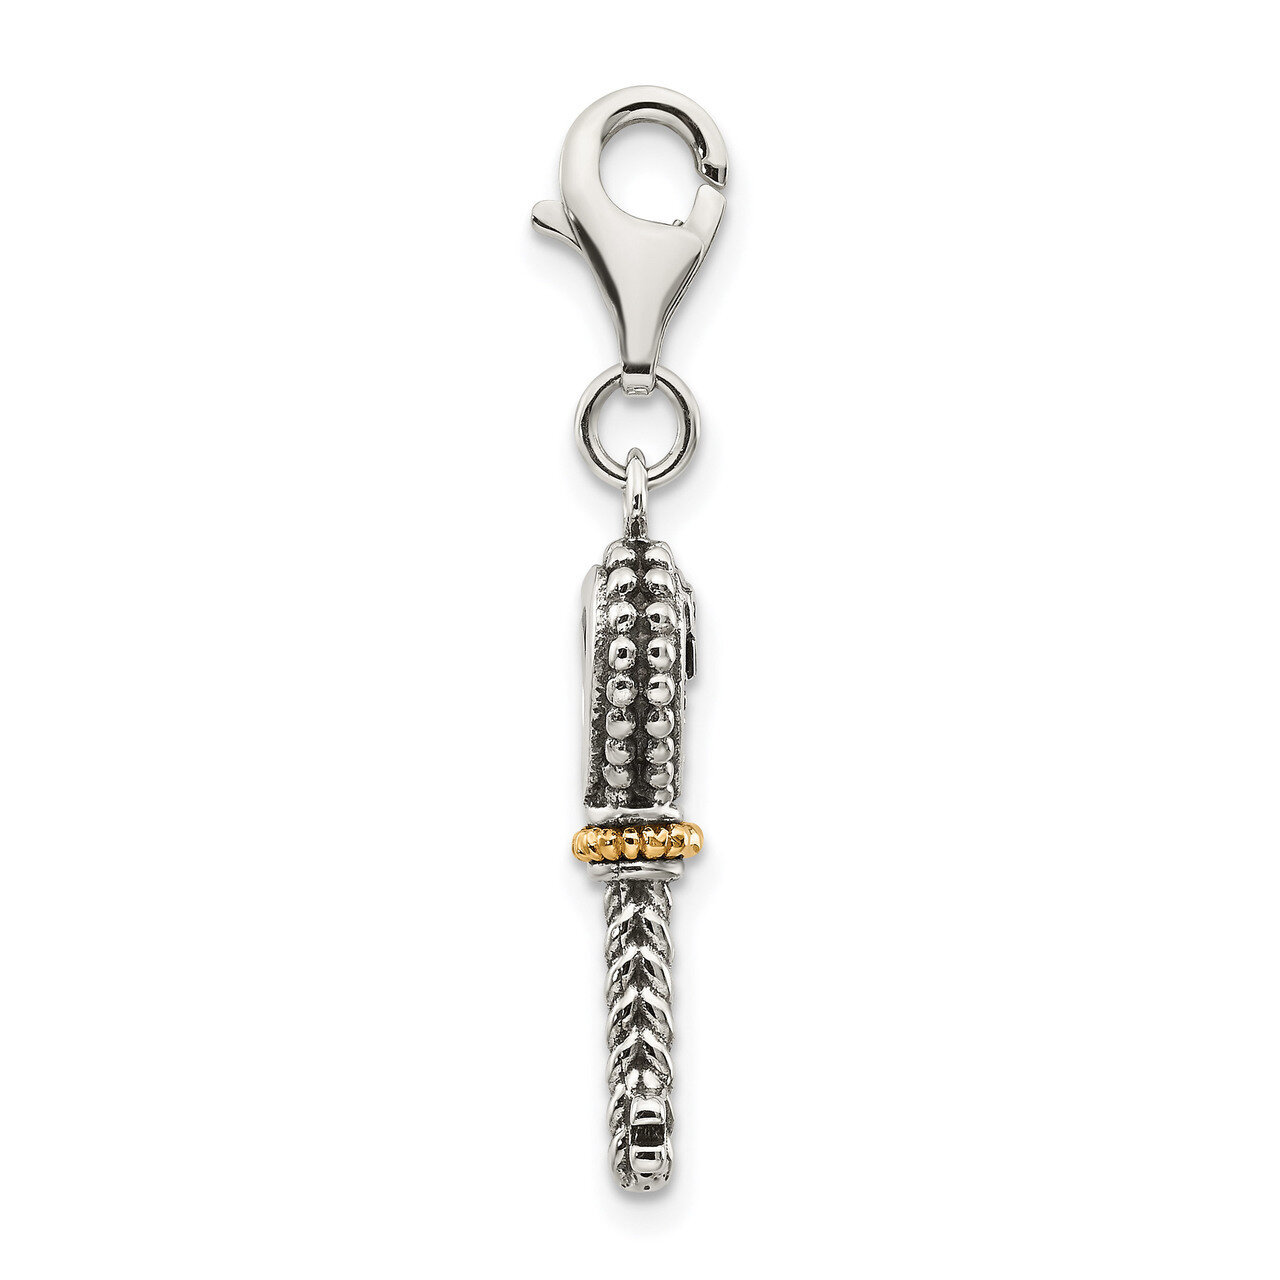 Citrine Antiqued Key with Lobster Clasp Charm Sterling Silver & 14k Gold QTC493